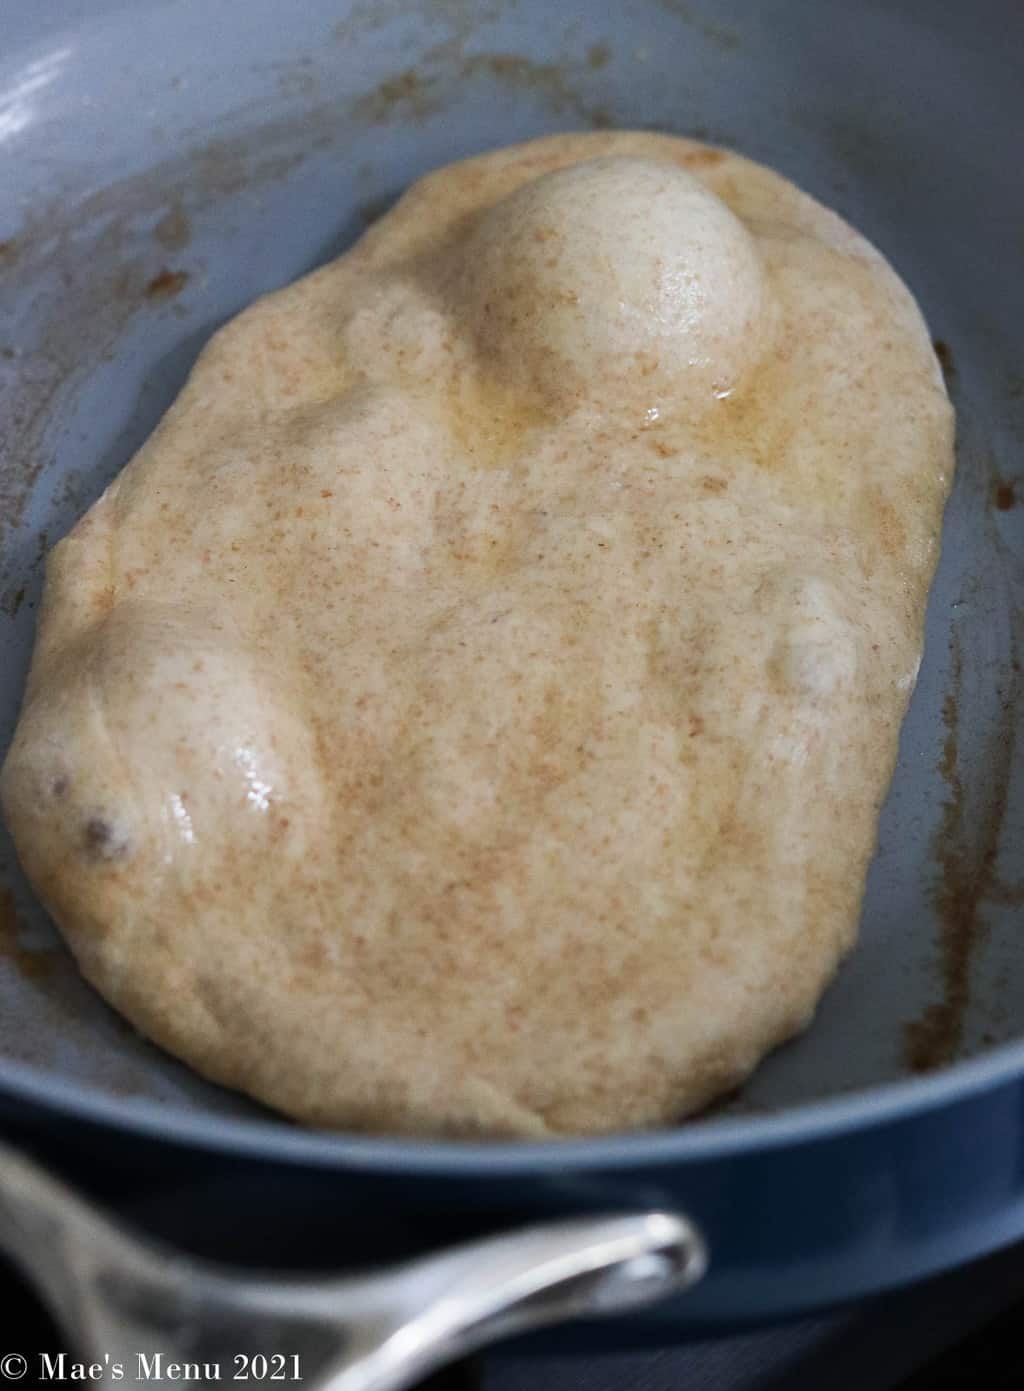 A piece of naan cooking in a skillet